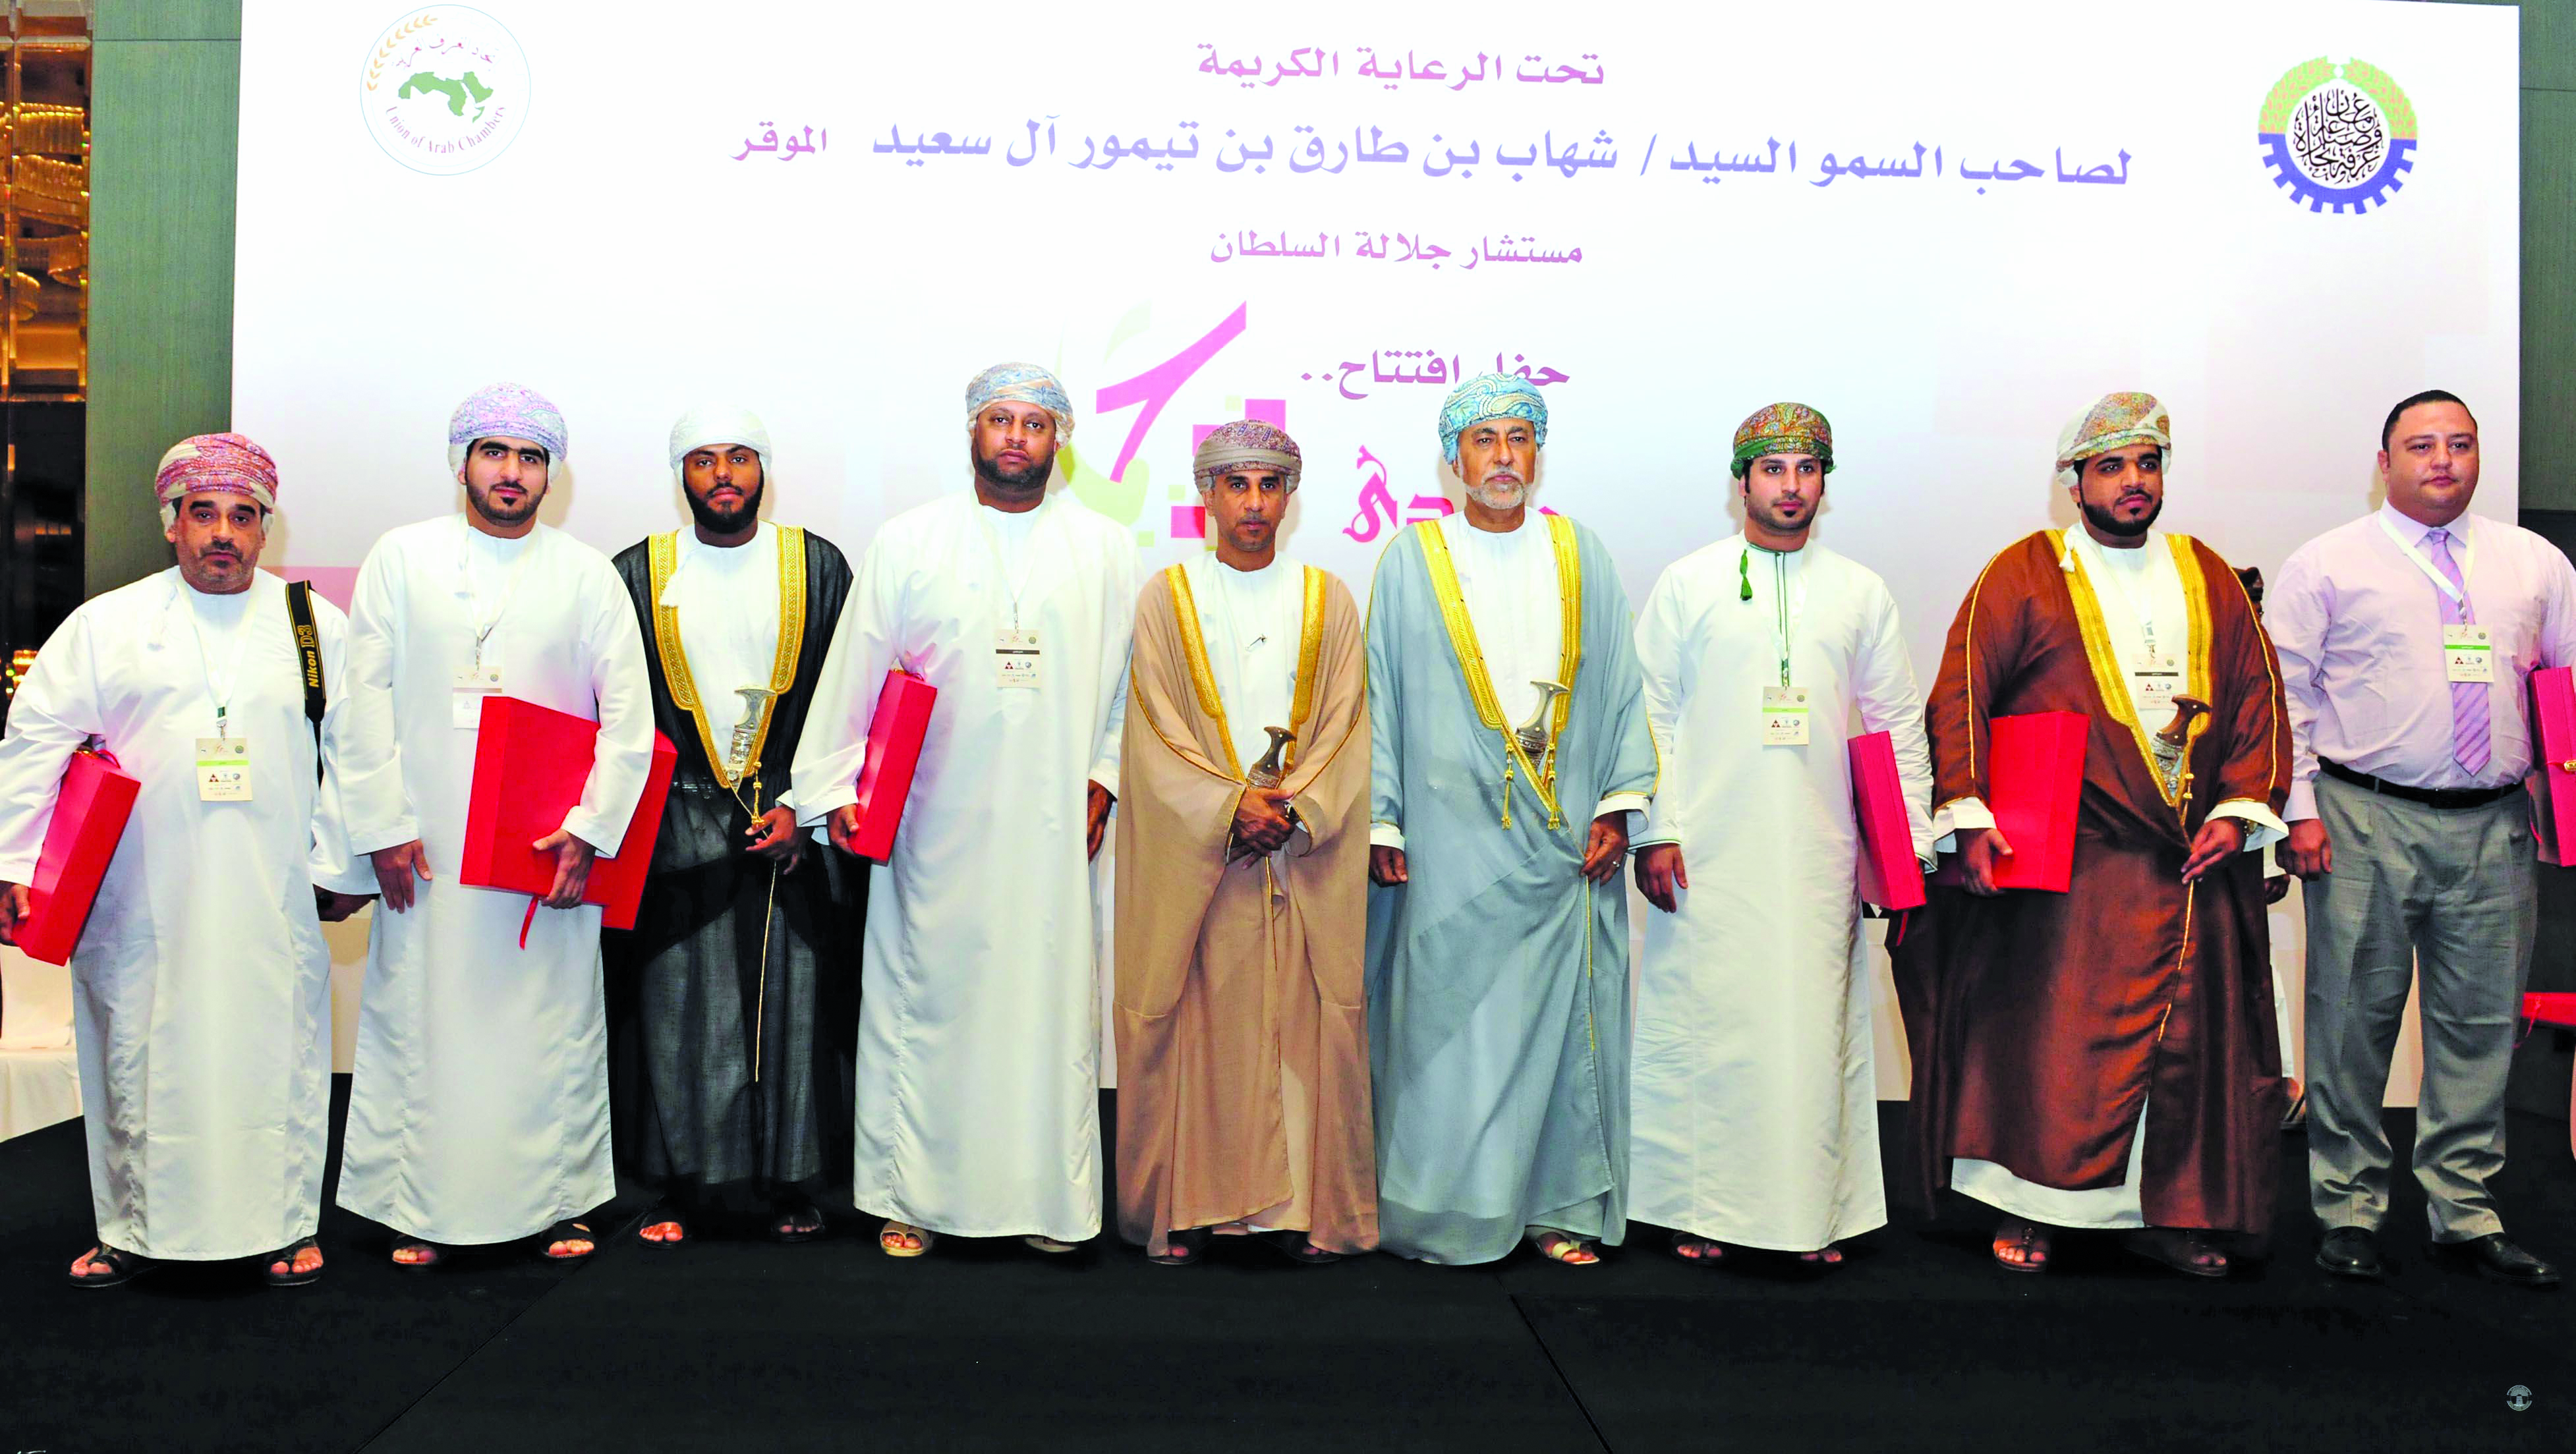 Opportunity to invest in Oman: Sayyid Shihab